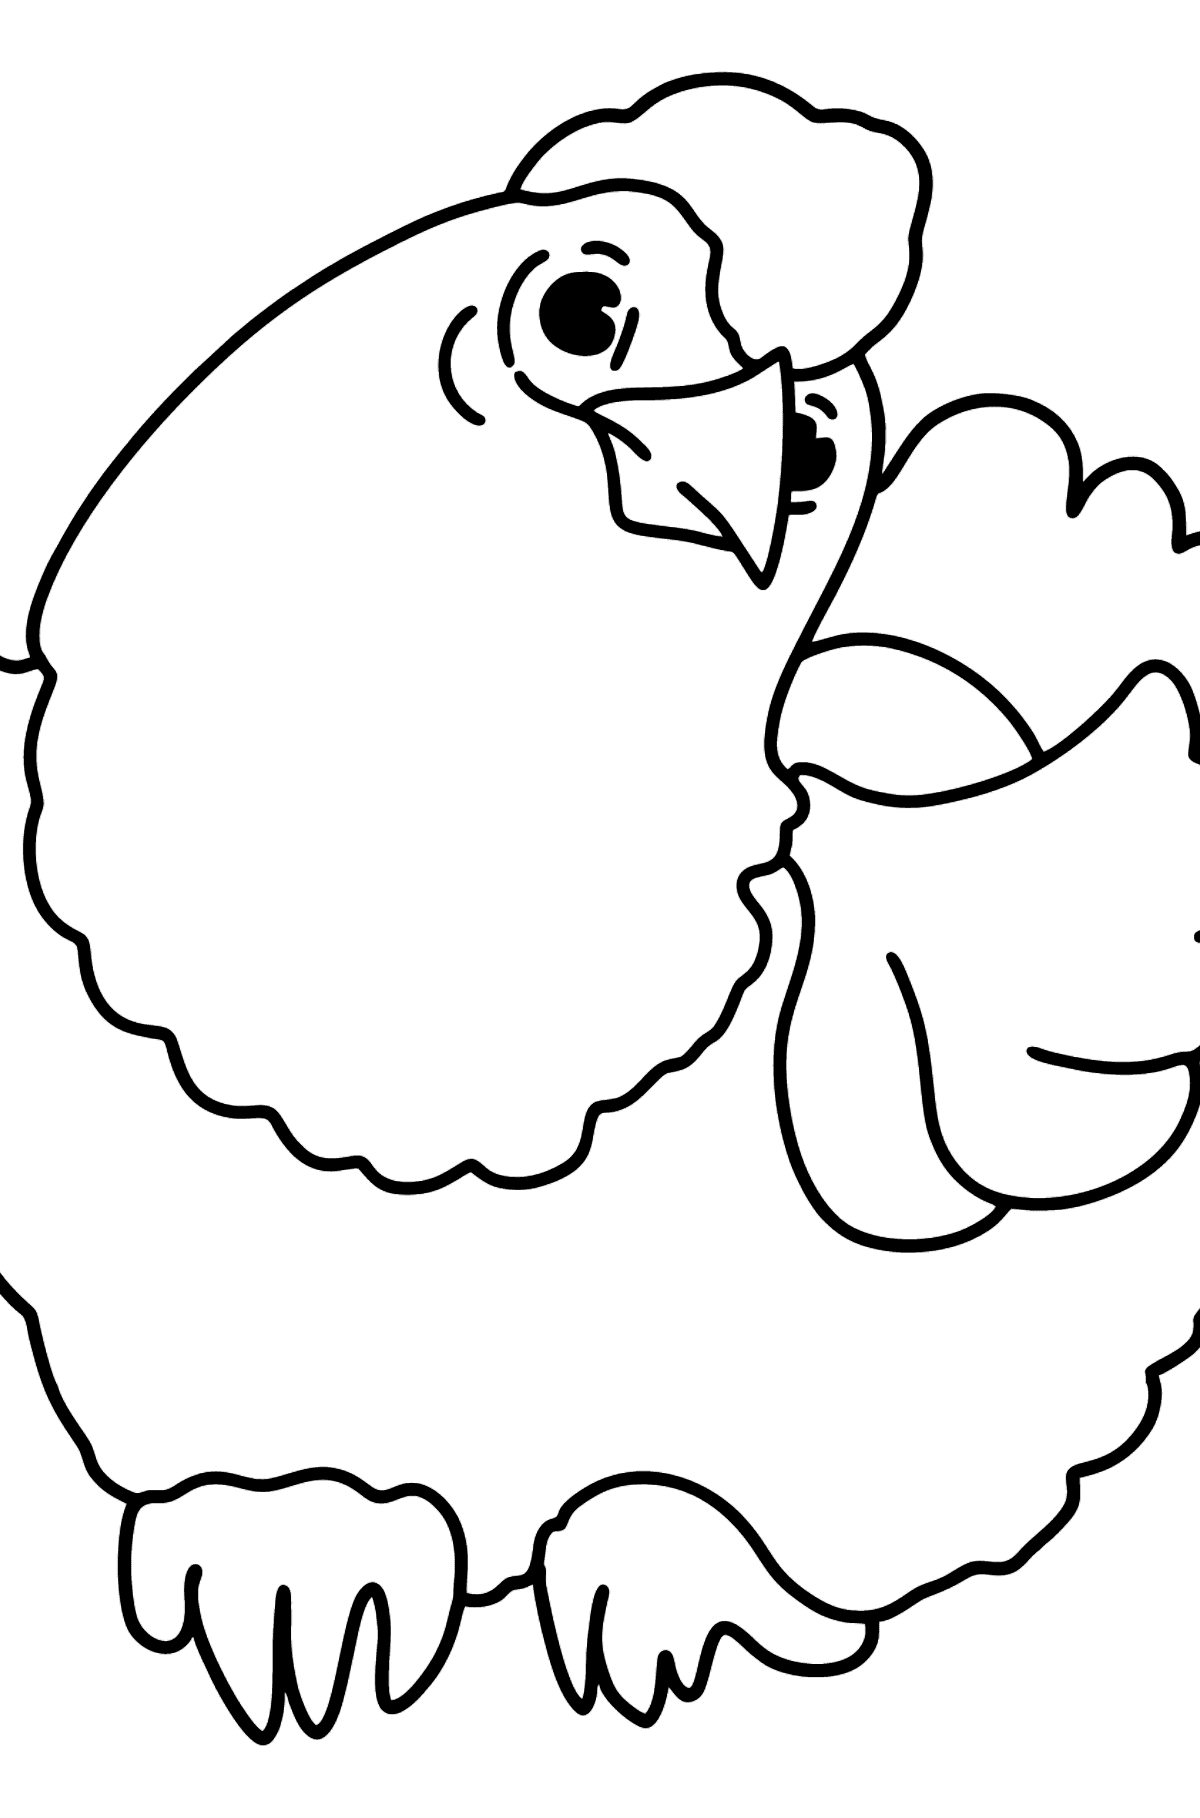 Simple coloring page with a Chicken - Coloring Pages for Kids